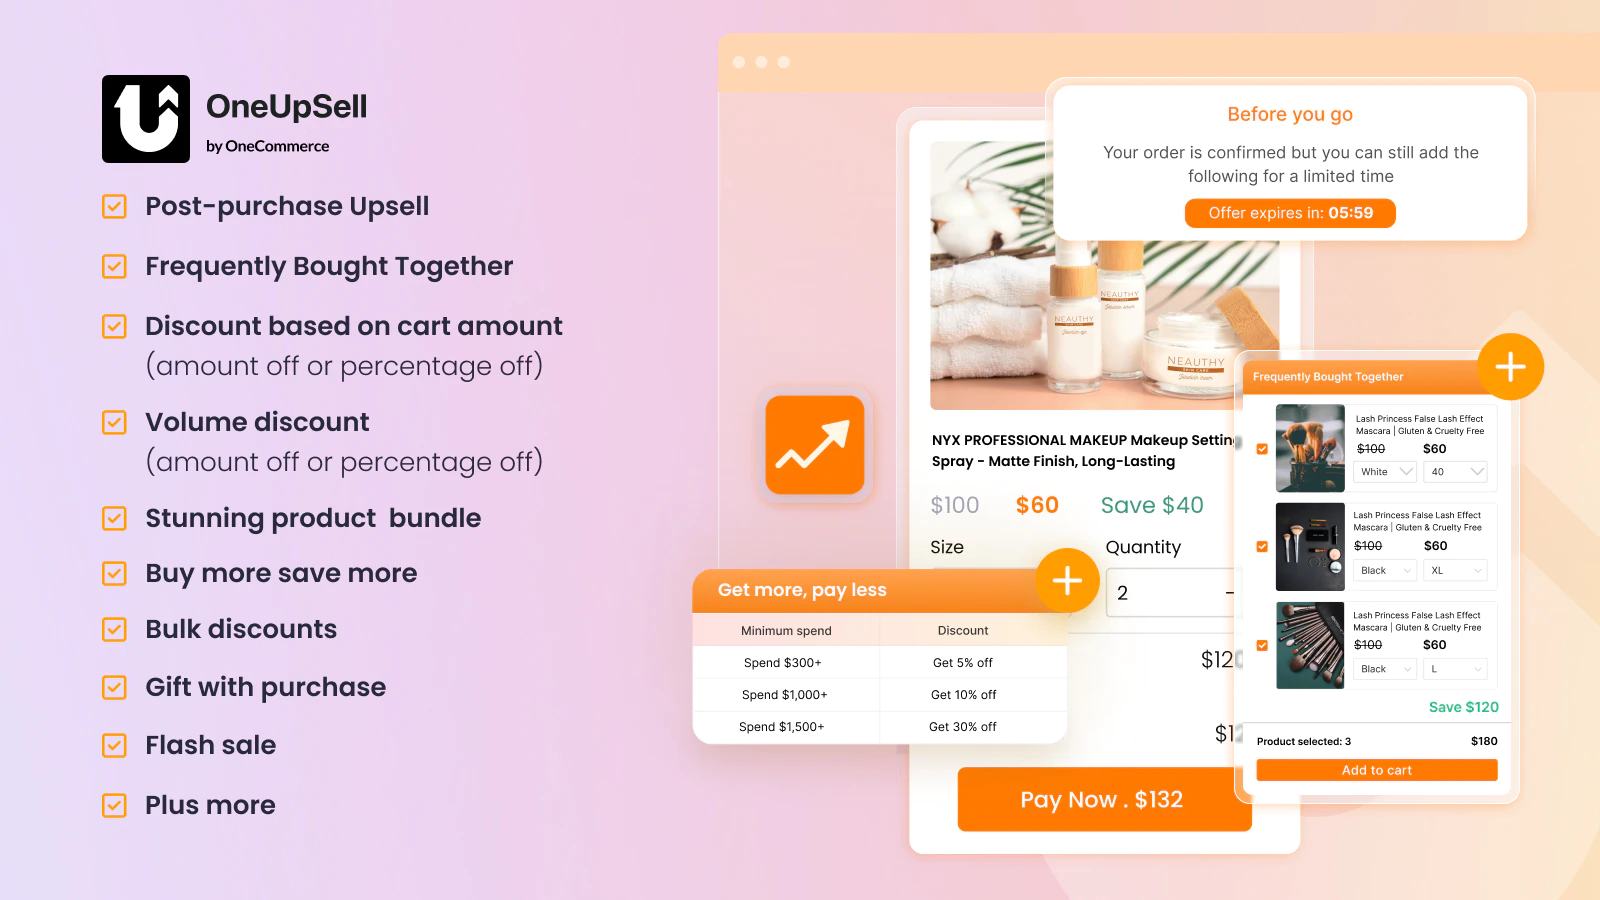 oneupsell by onecommerce